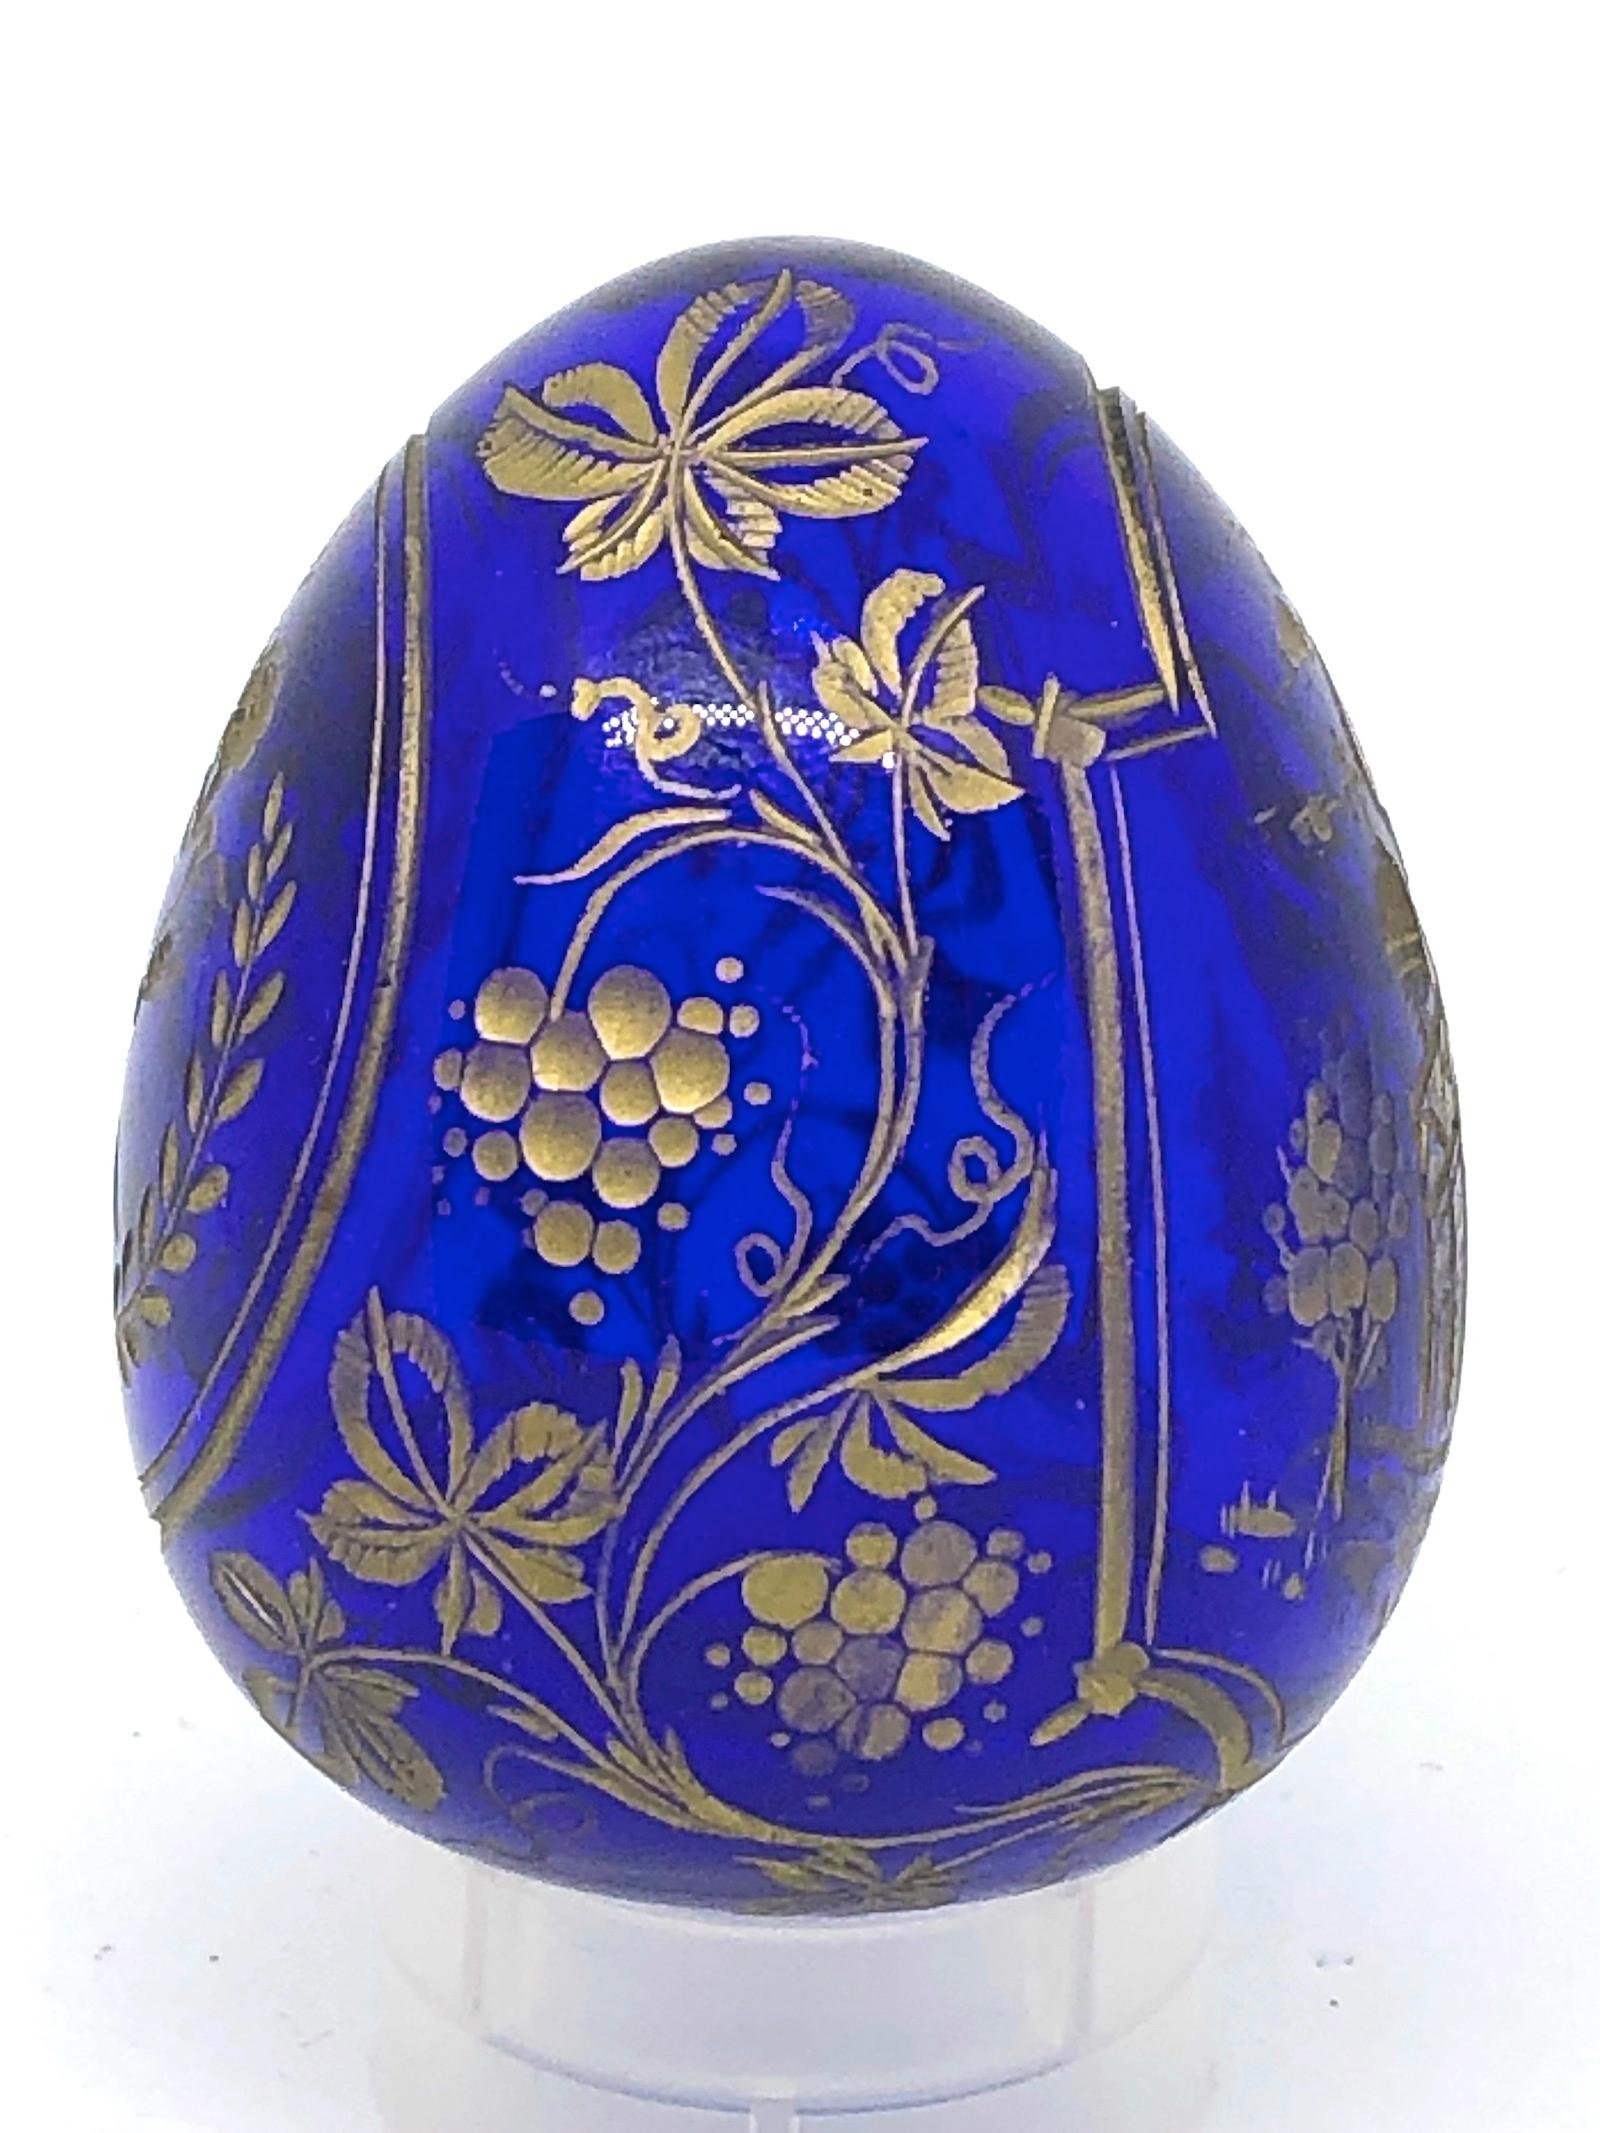 Vintage Faberge Russia style glass egg with etched royal crown. Reminiscent of eggs from St. Petersburg. Measures: 1.75